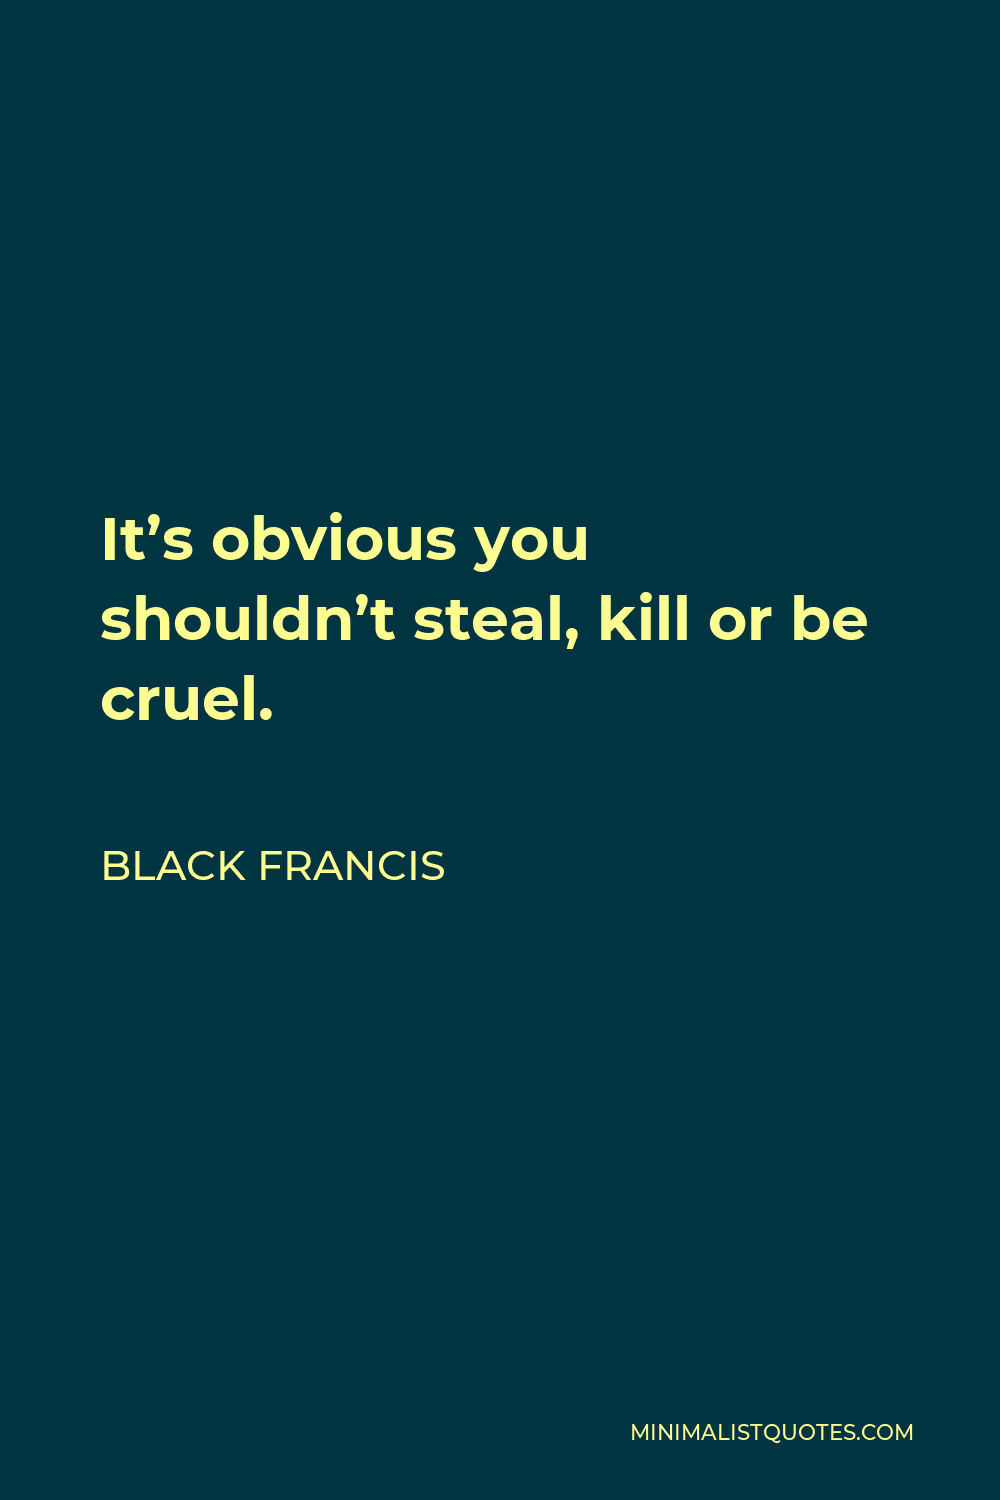 Black Francis Quote - It’s obvious you shouldn’t steal, kill or be cruel.